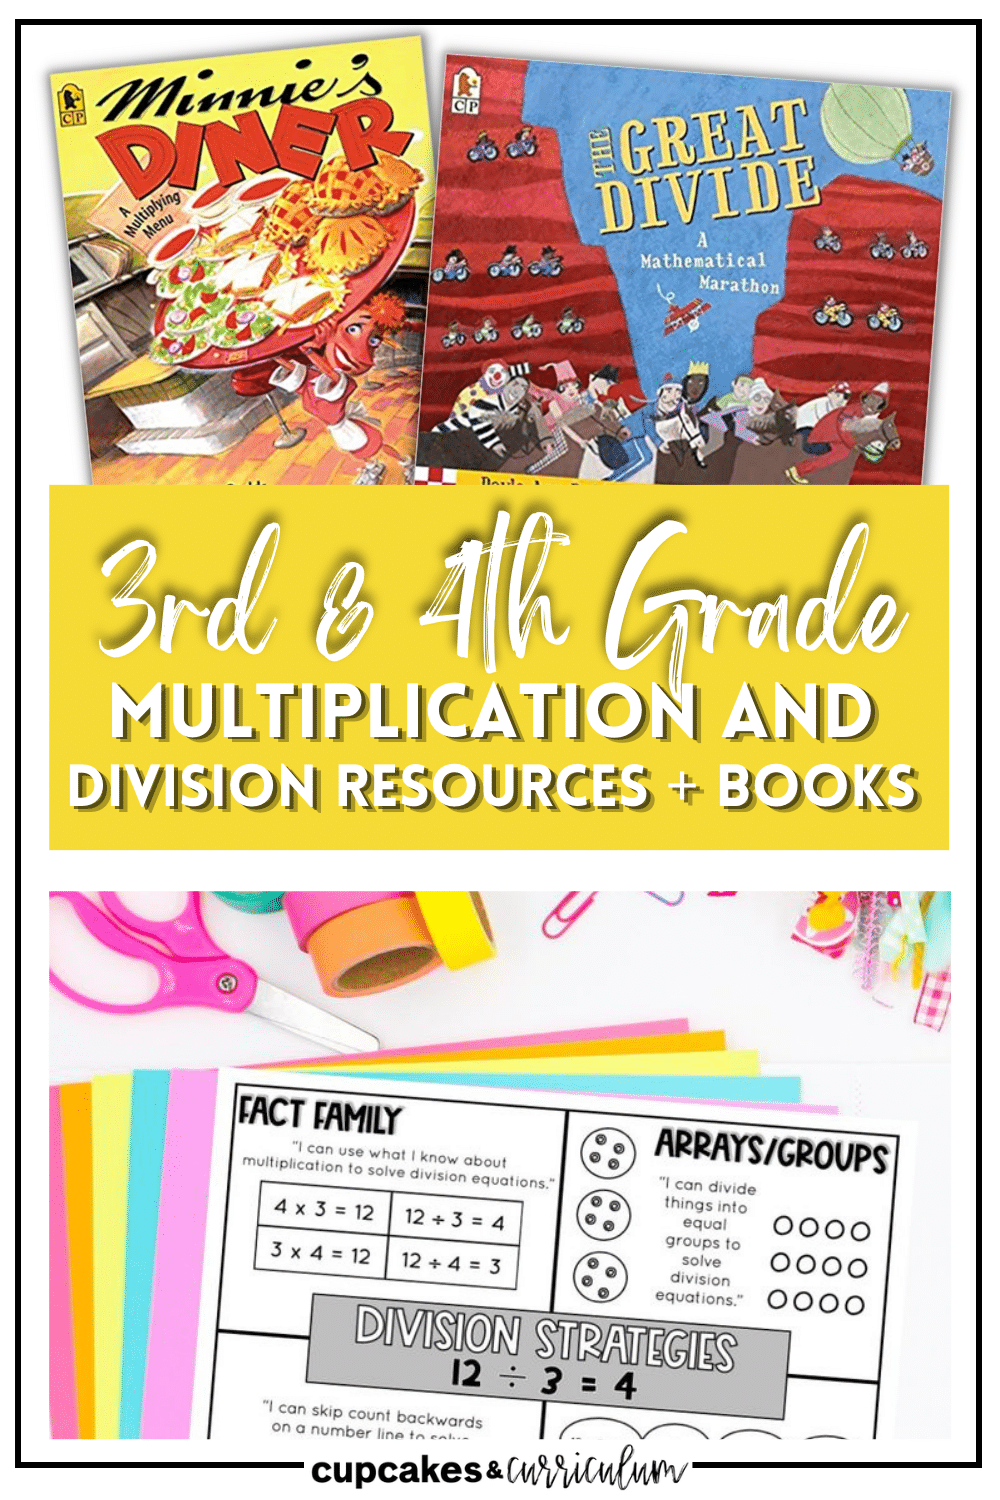 3rd and 4th Grade Multiplication and Division Resources + Books